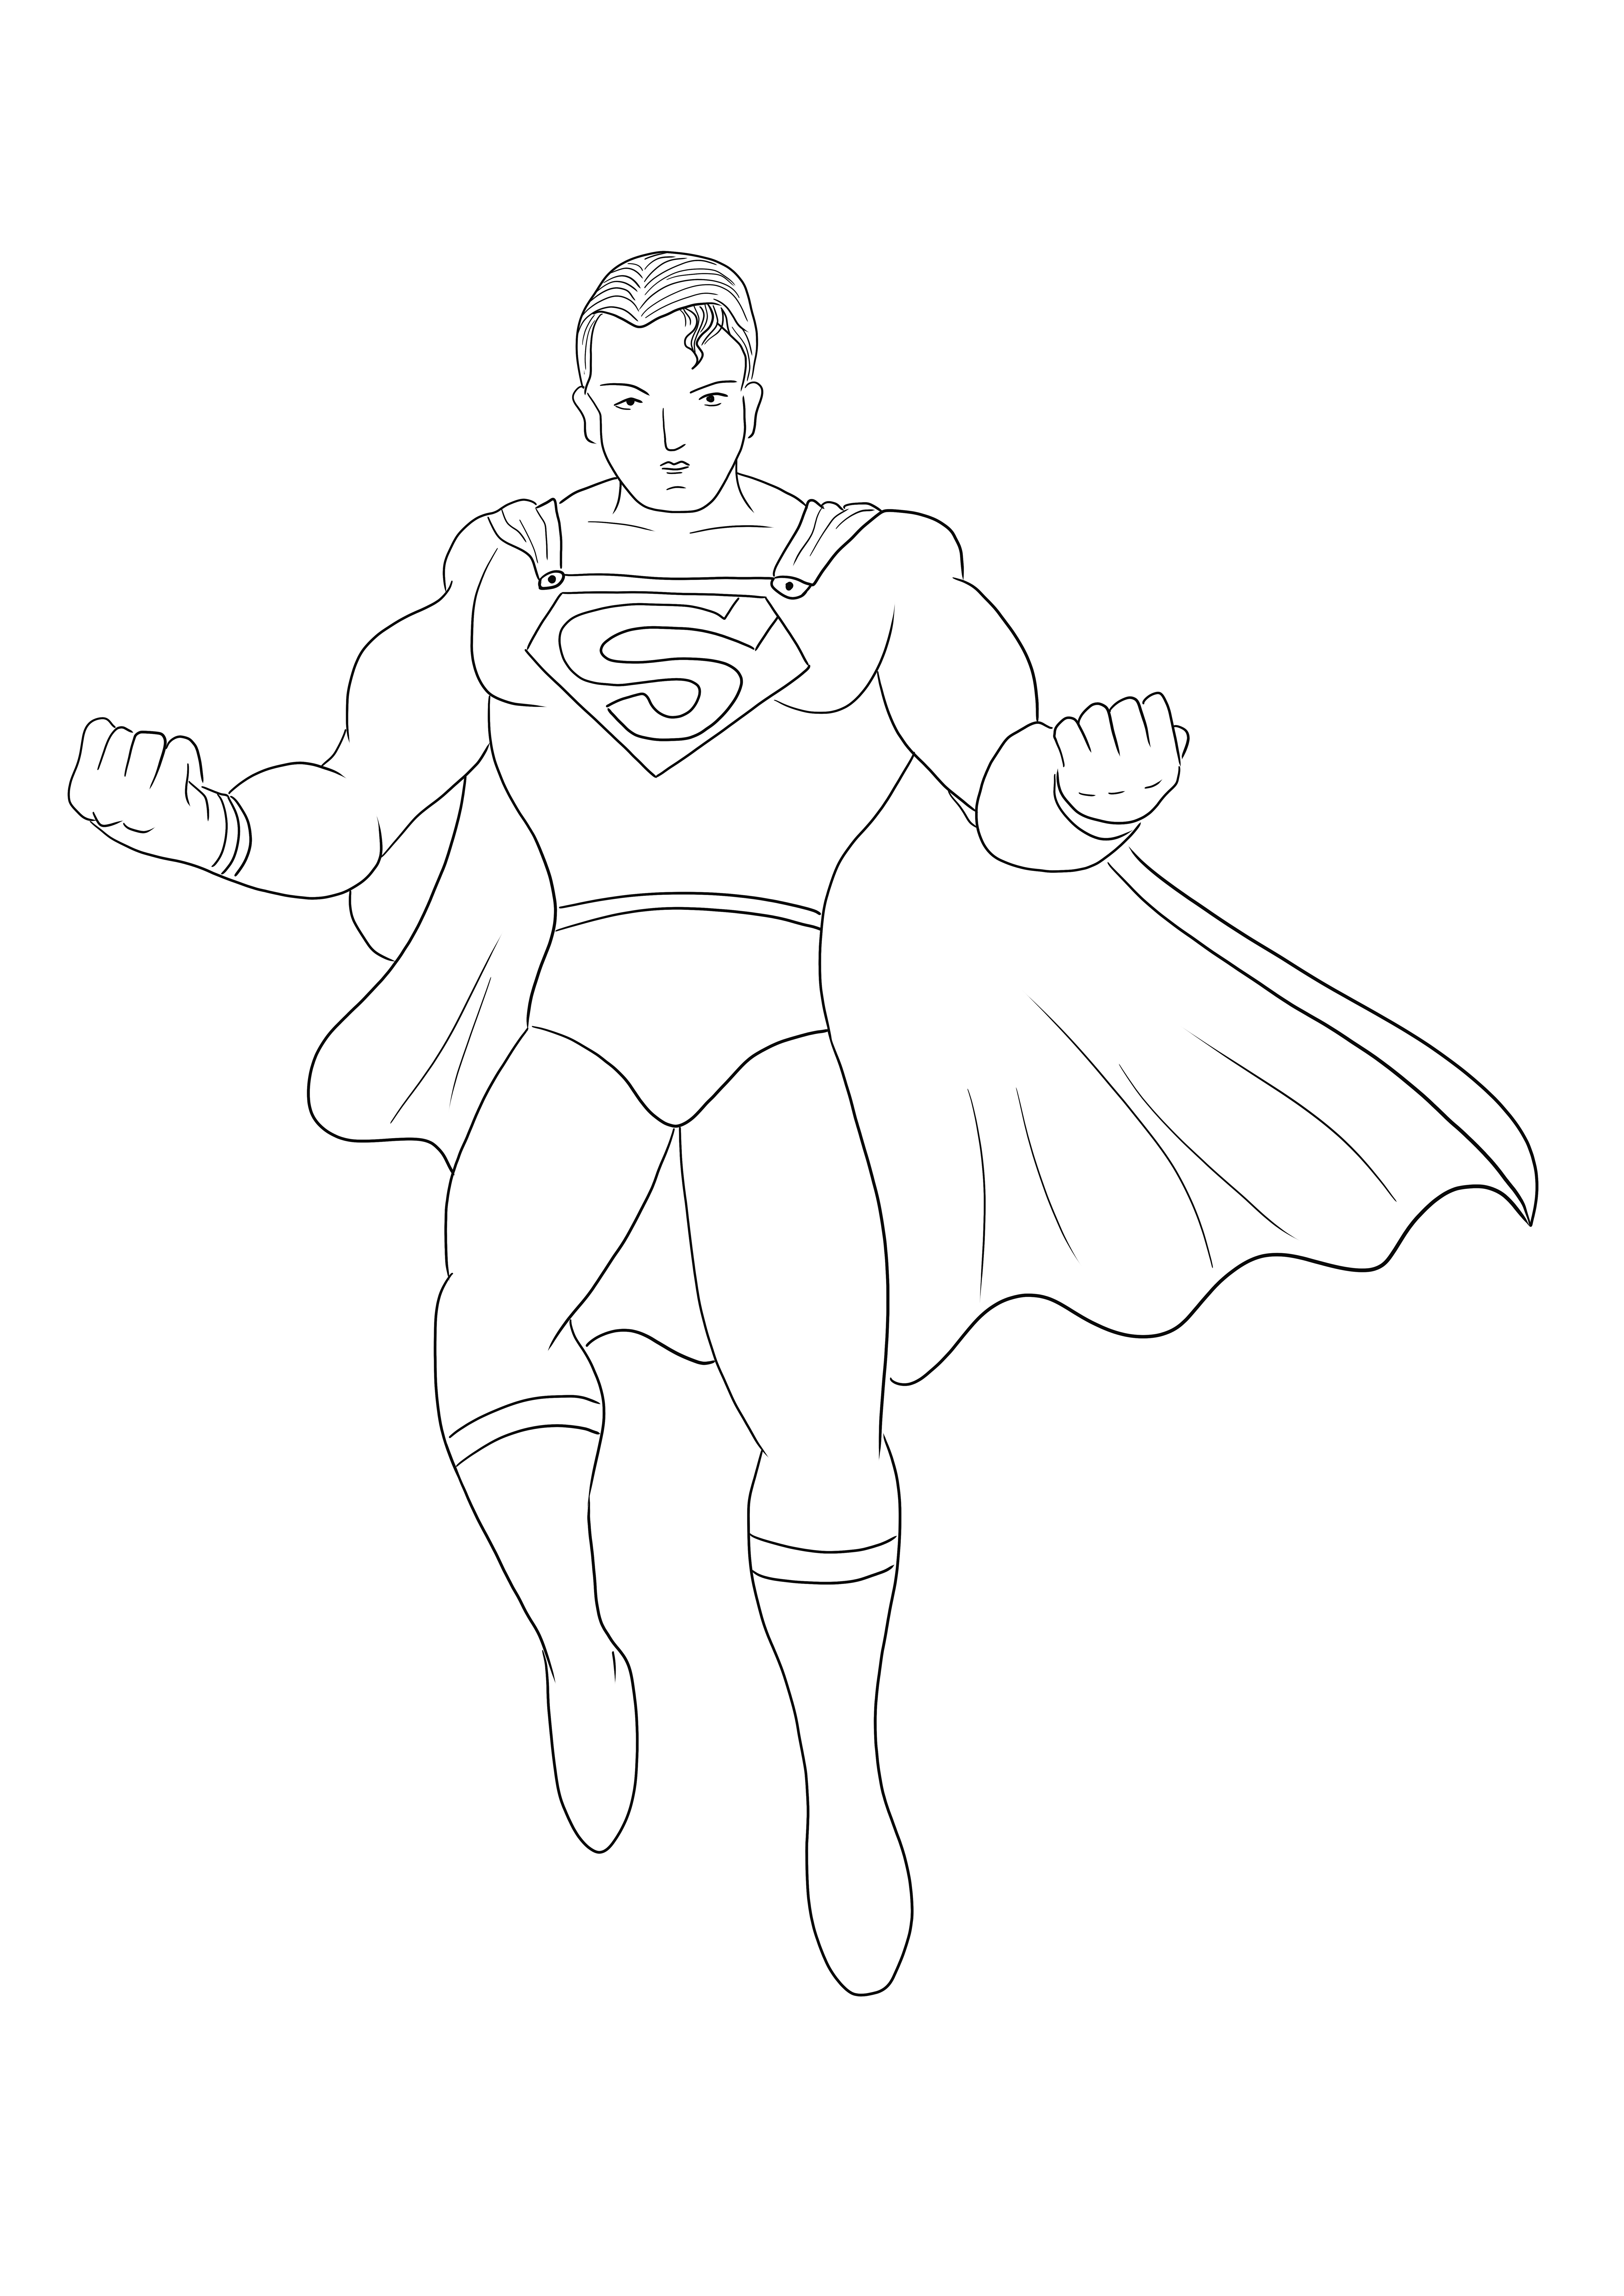 The simple and easy coloring sheet of Superman hero free to print